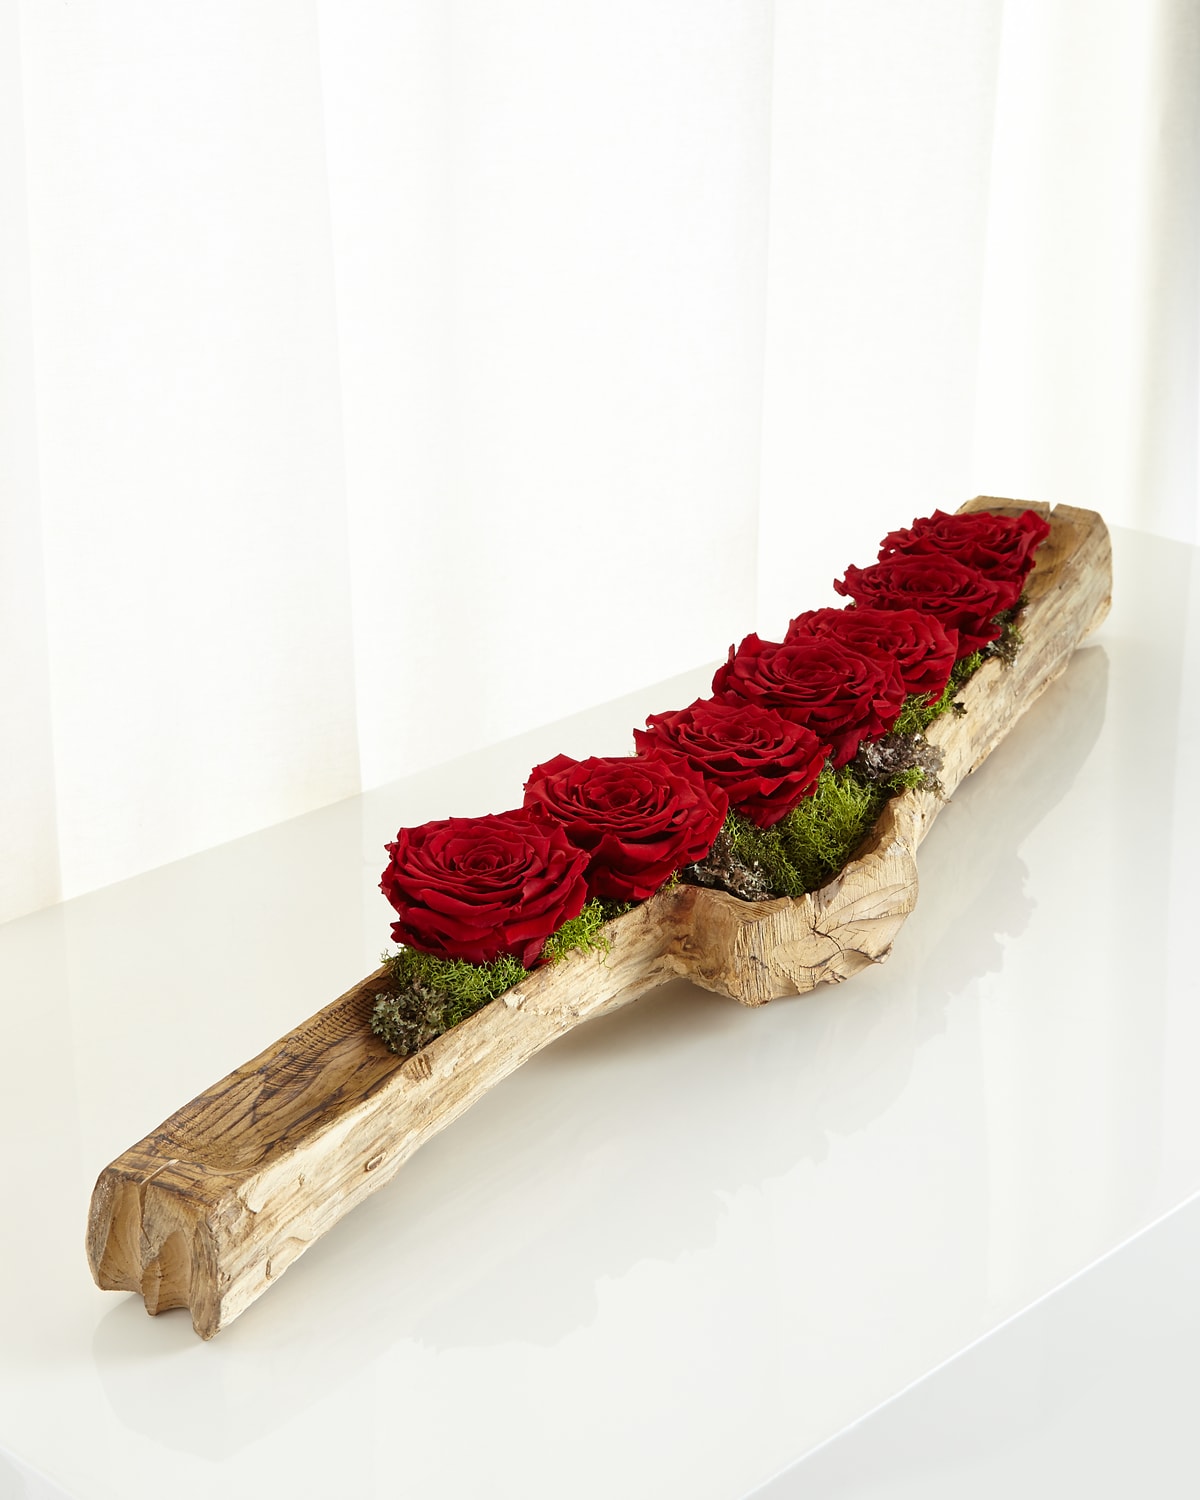 Shop T & C Floral Company Preserved Roses In Wood Log In Red